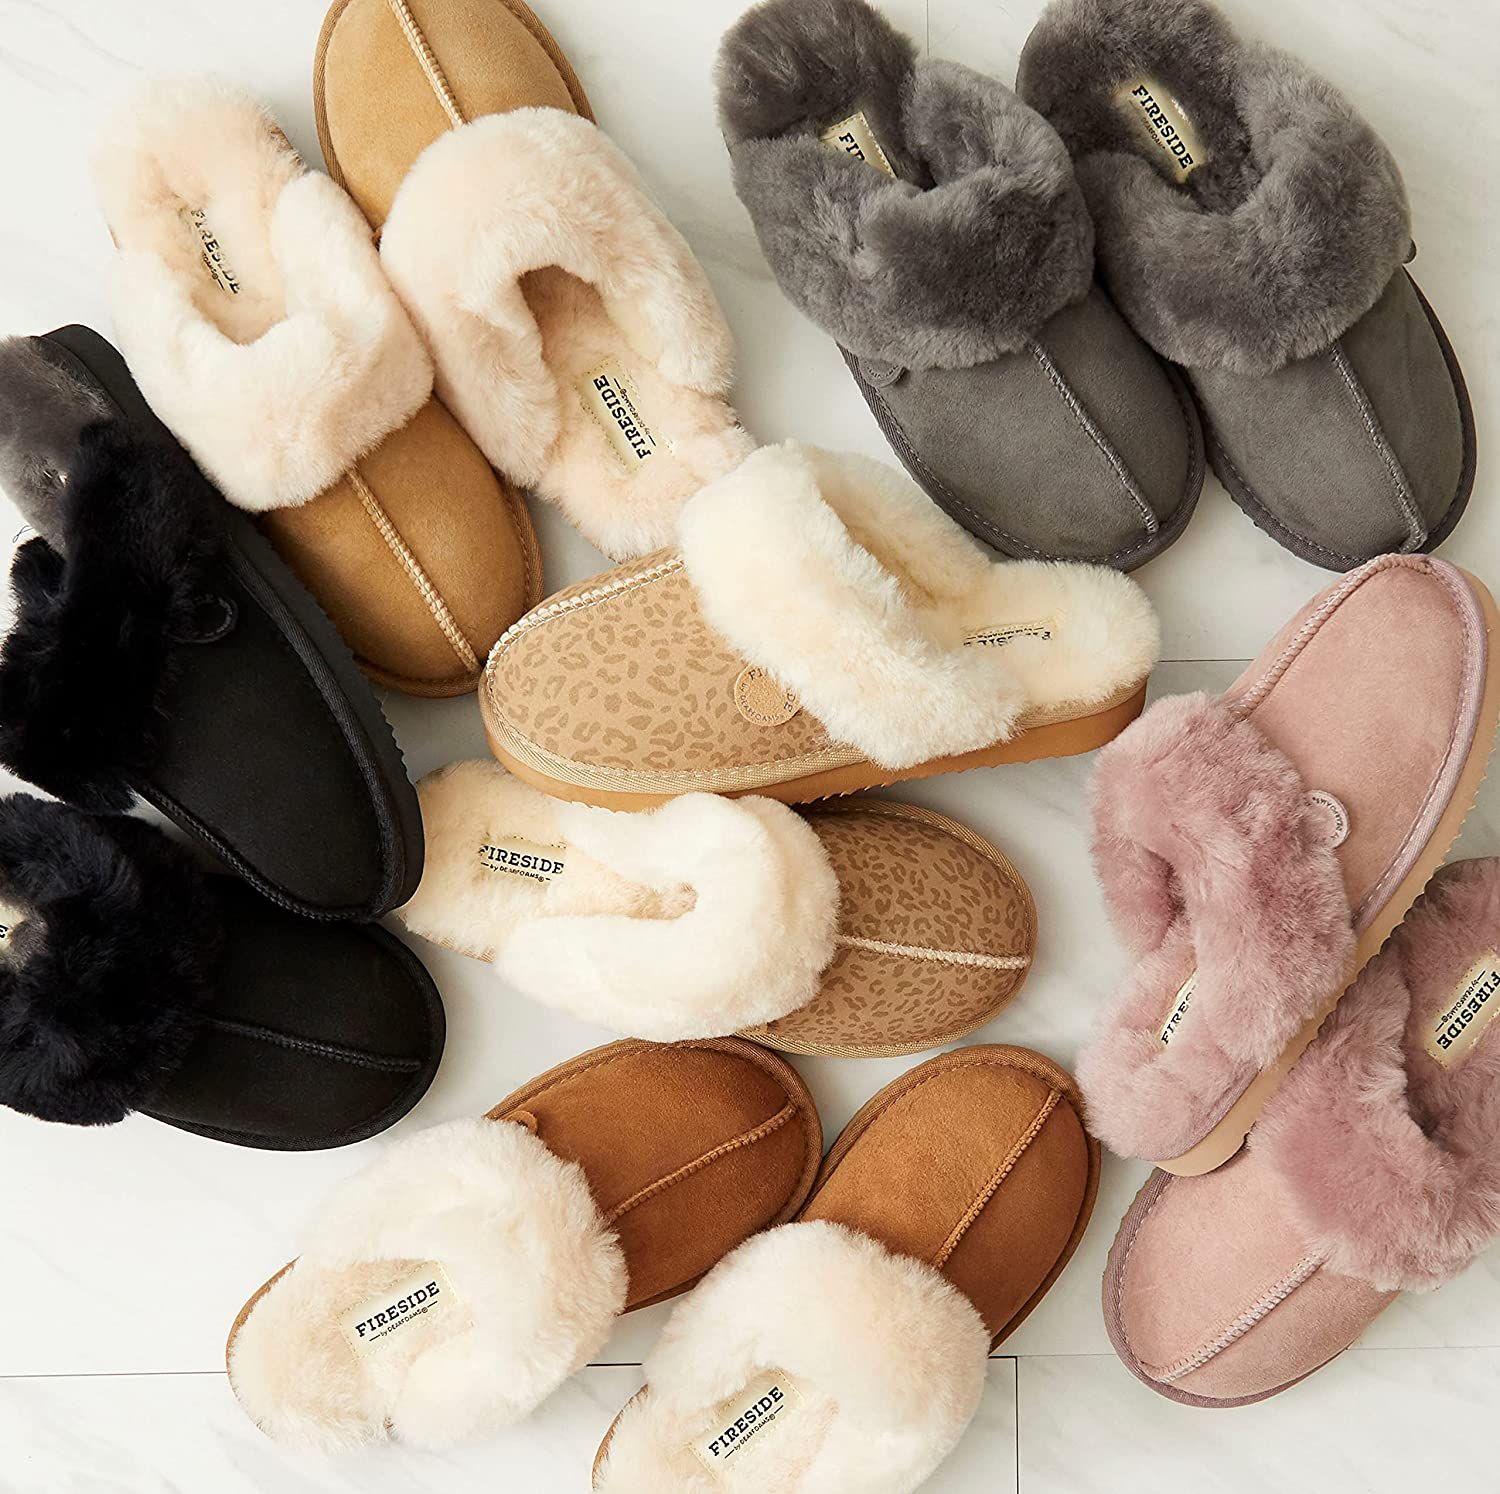 15 Best Slippers for 2021 - Slippers to Buy